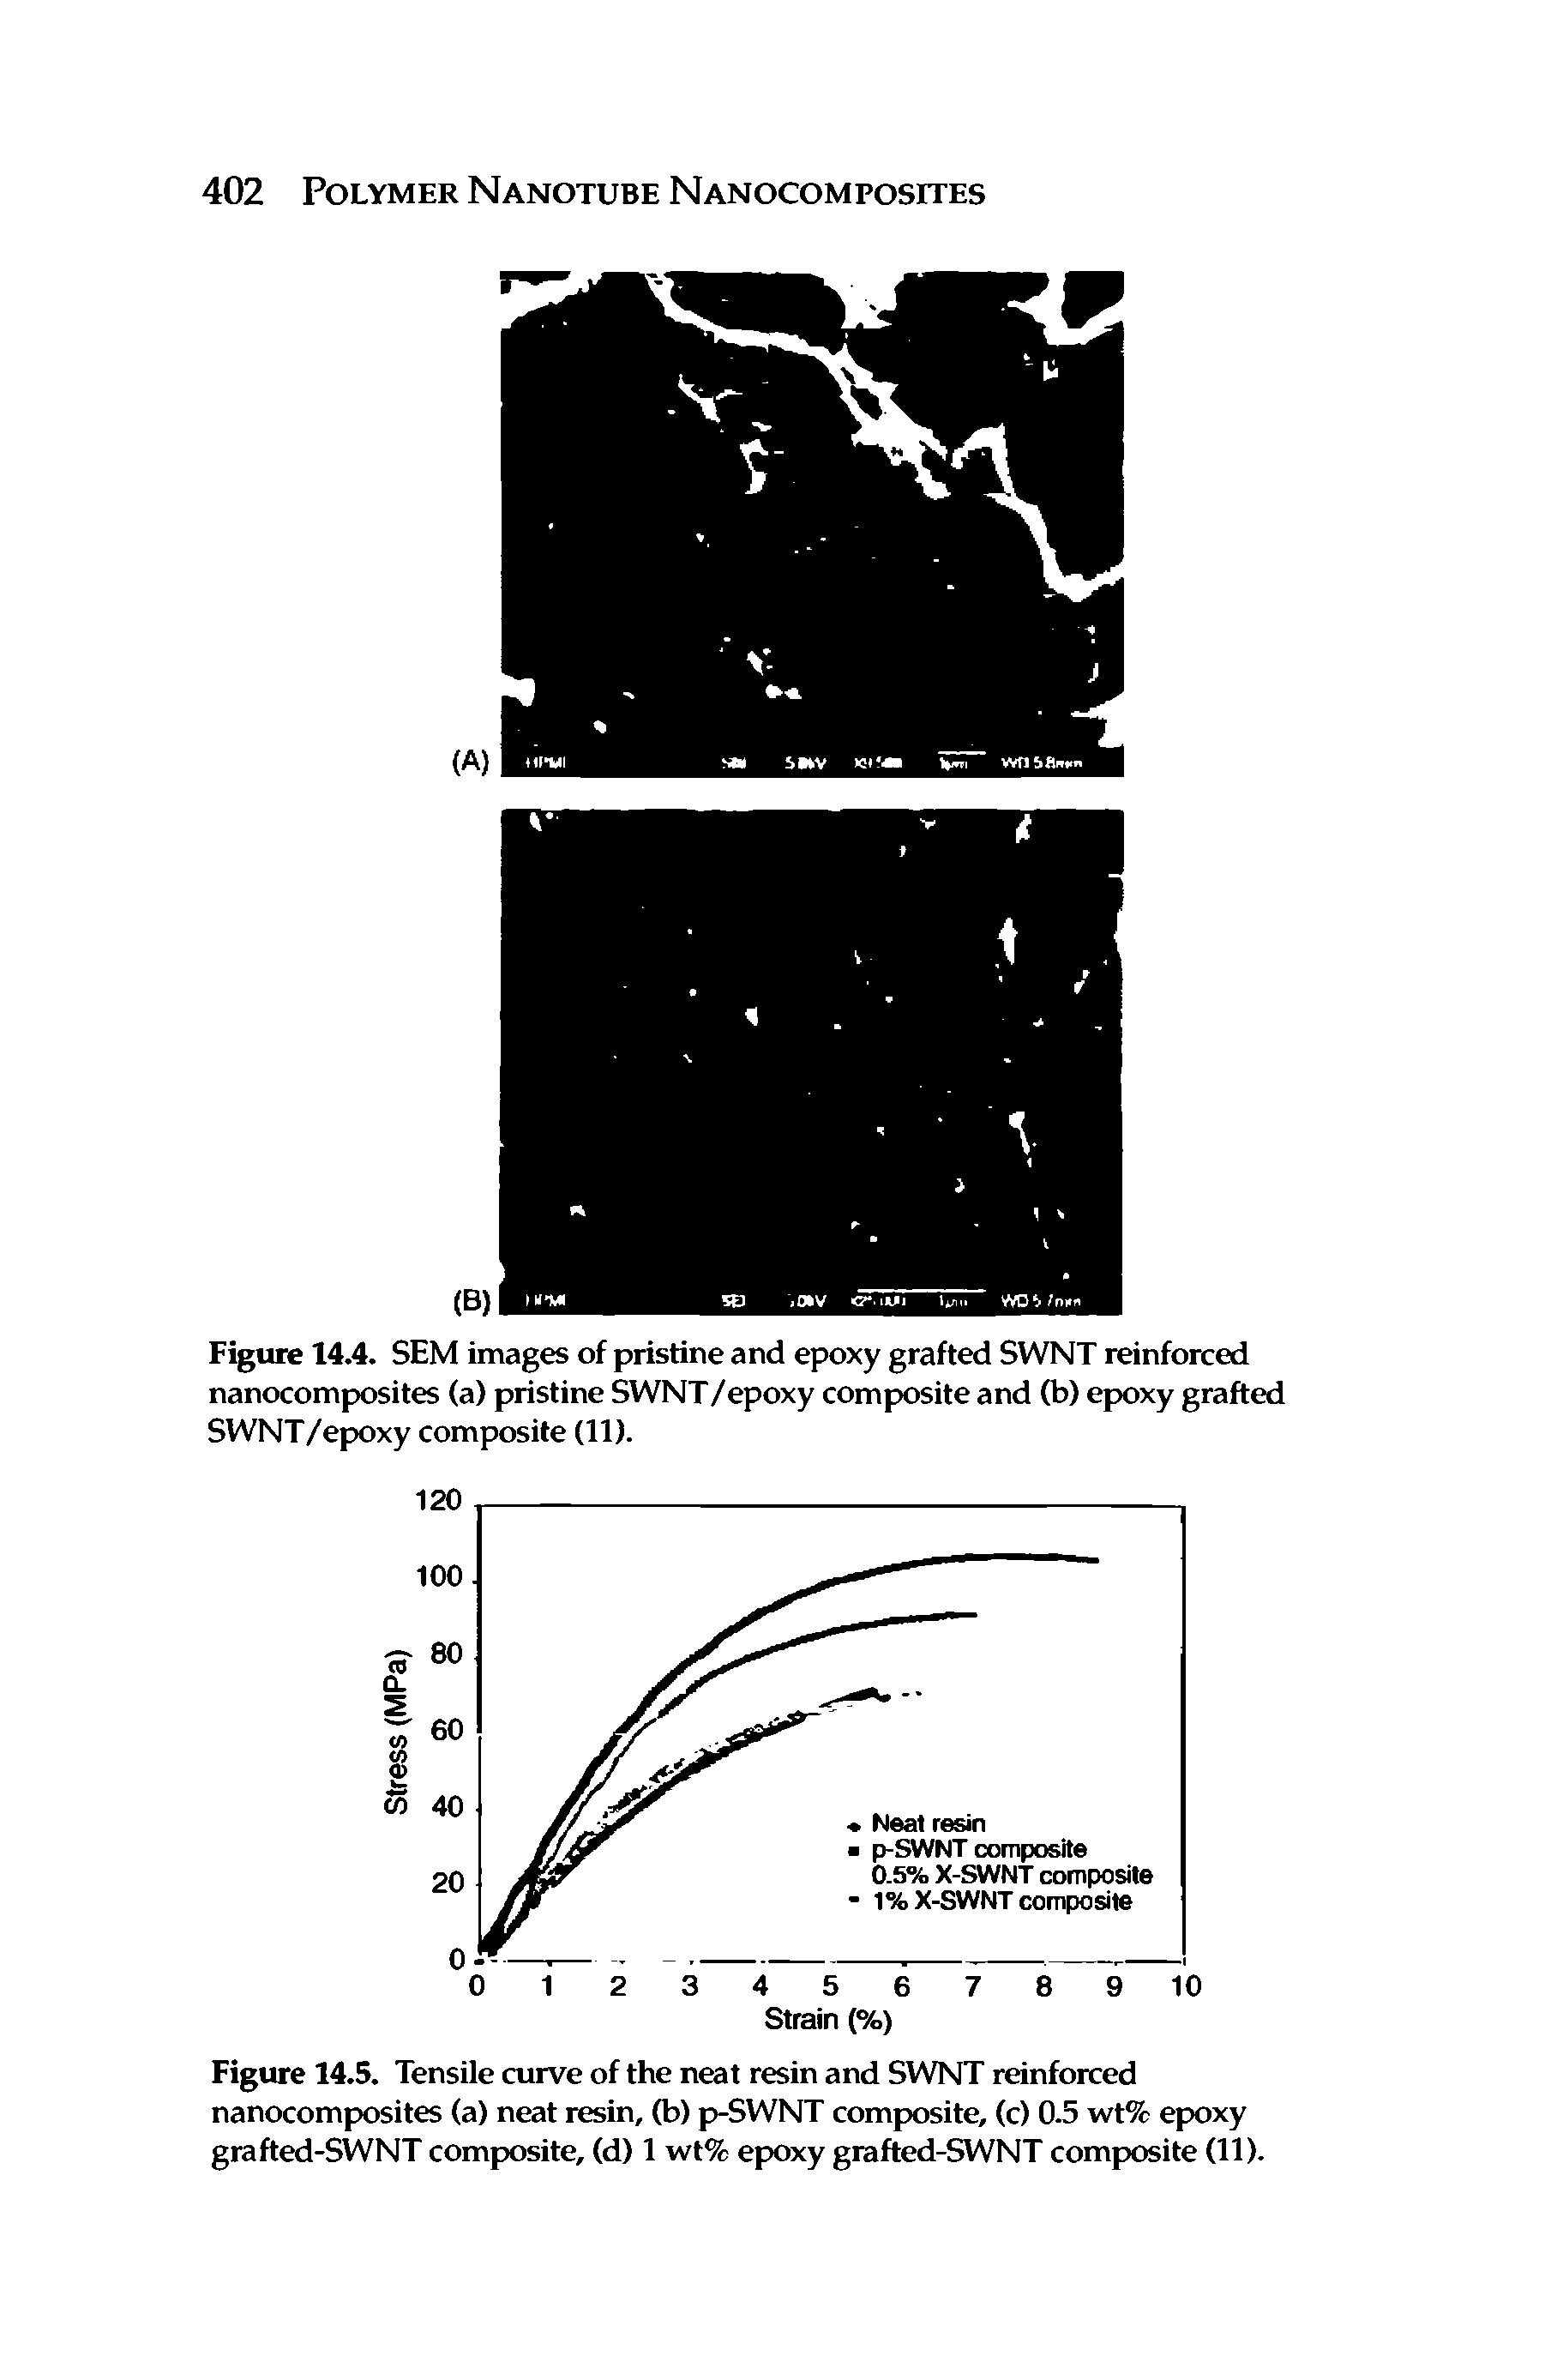 Figure 14.5. Tensile curve of the neat resin and SWNT reinforced nanocomposites (a) neat resin, (b) p-SWNT composite, (c) 0.5 wt% epoxy grafted-SWNT composite, (d) 1 wt% epoxy grafted-SWNT composite (11).